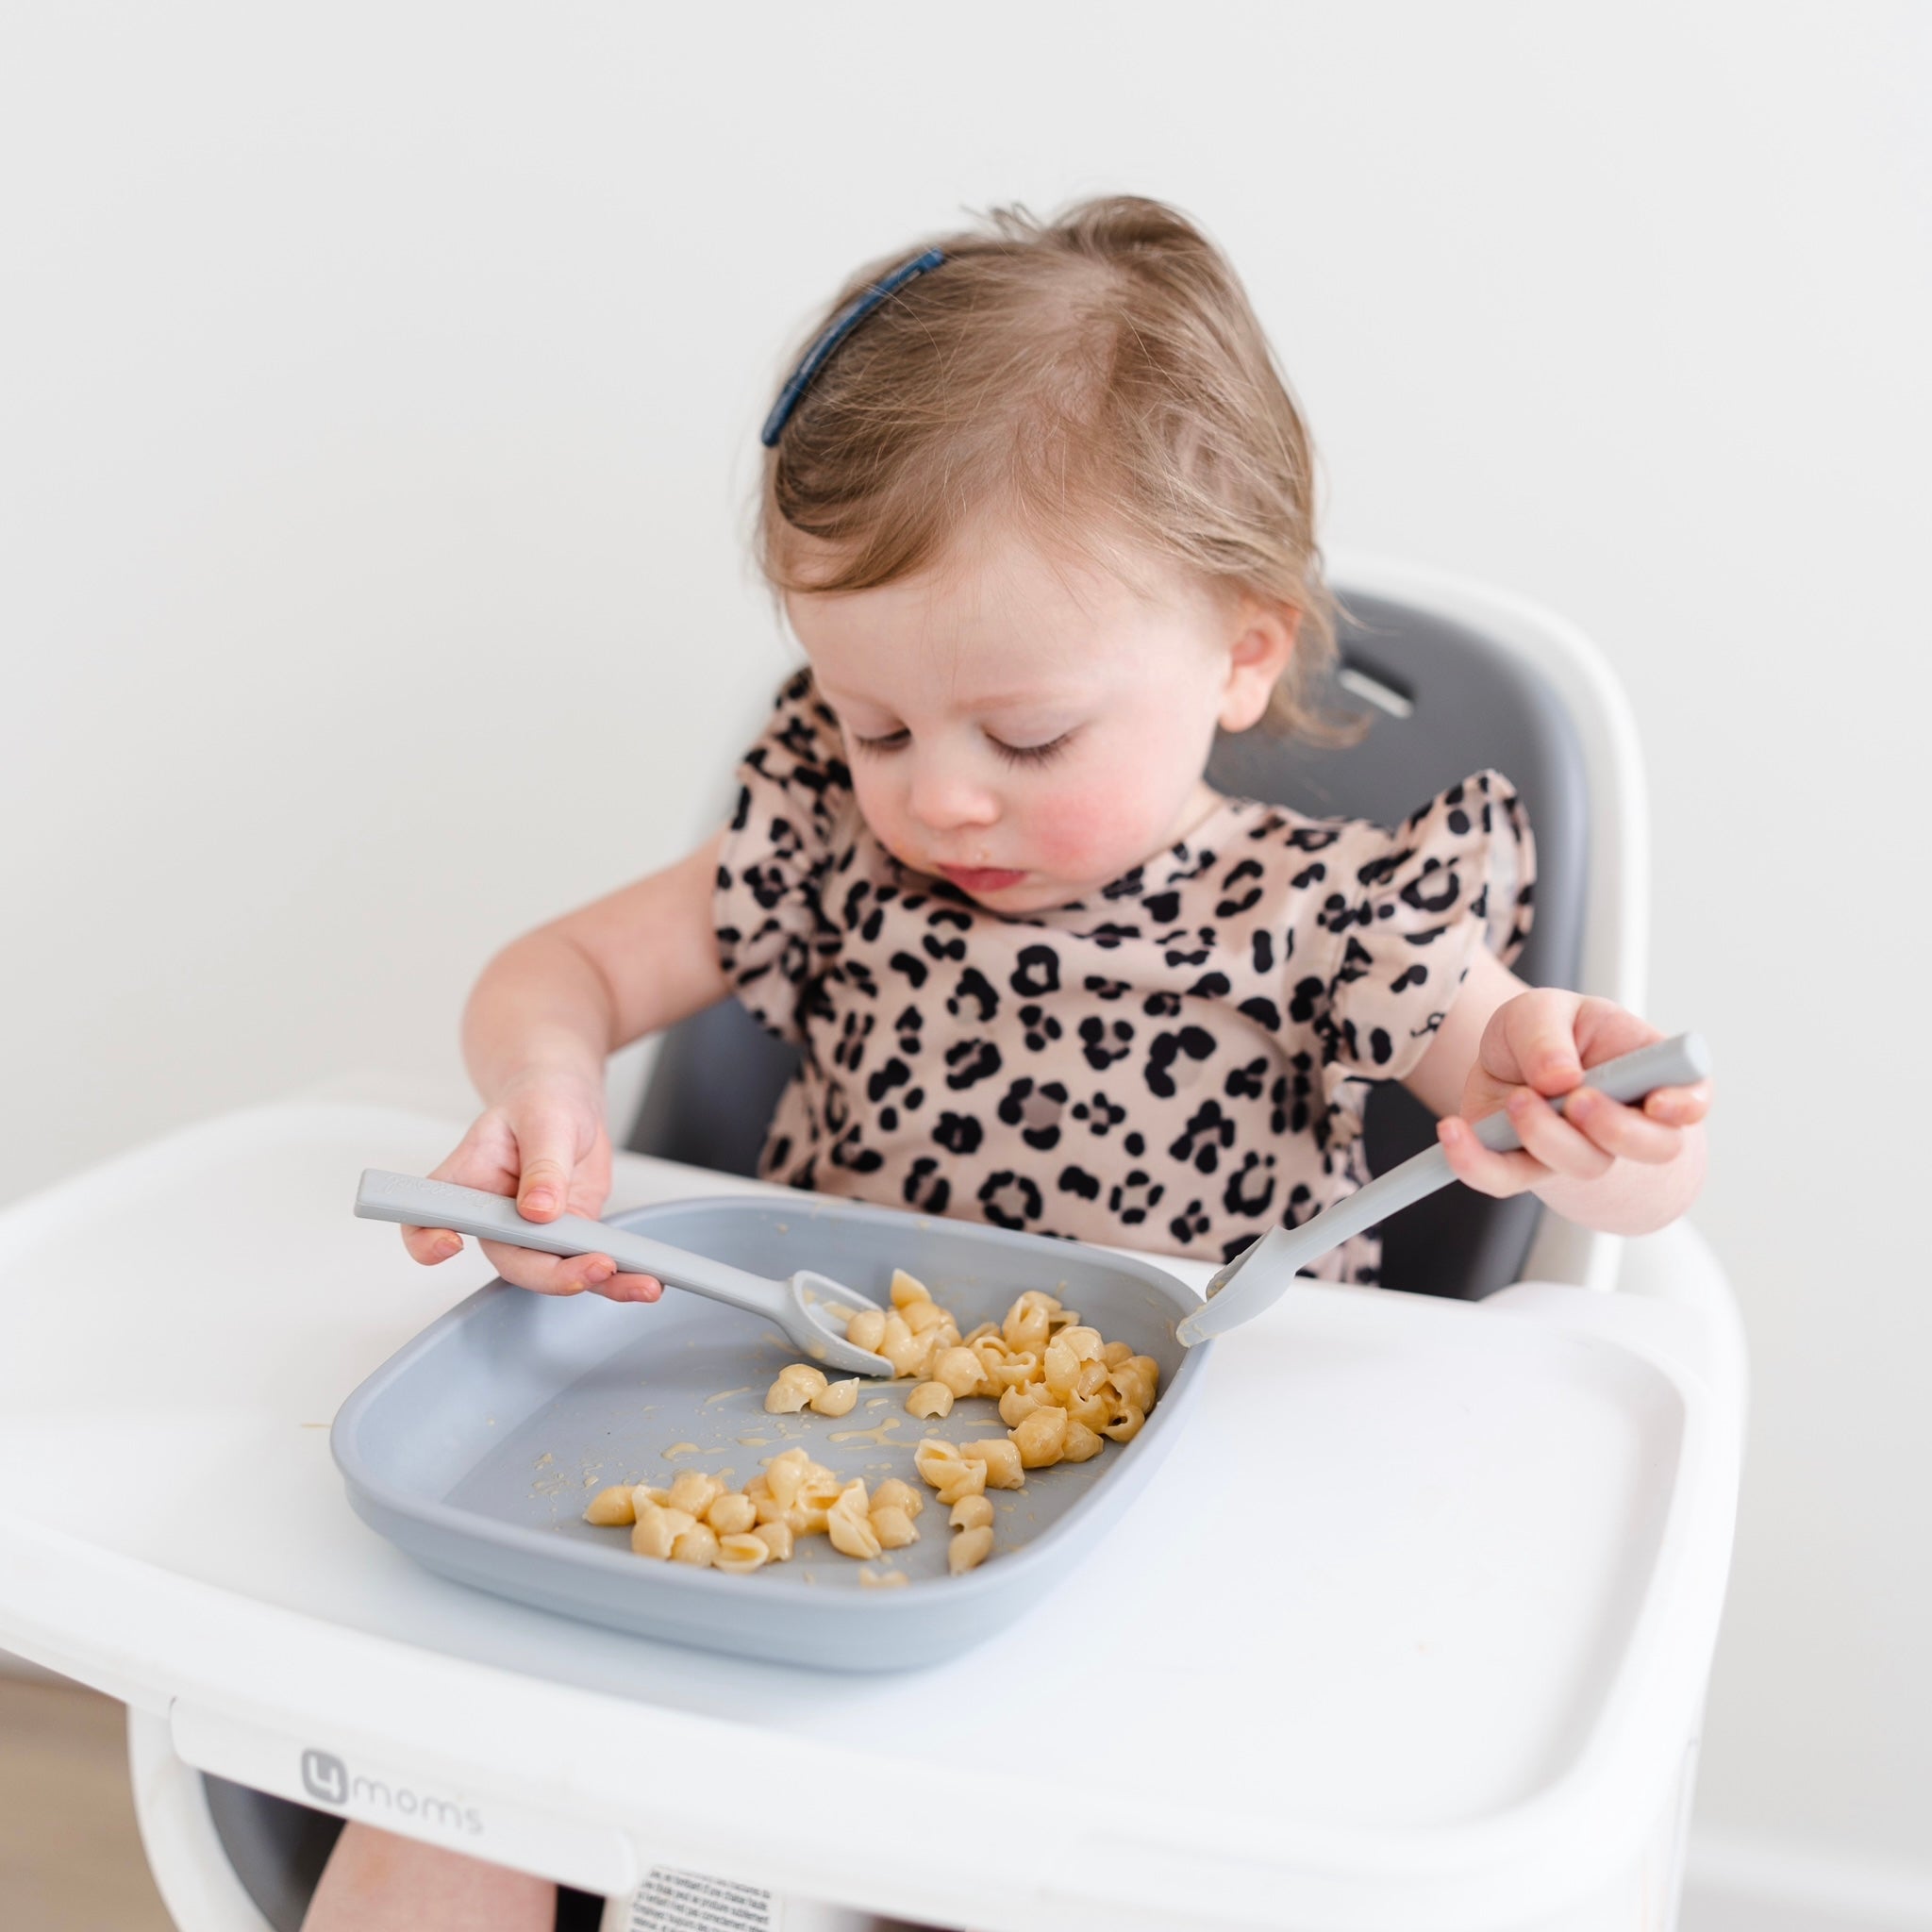 When Can Babies Use Spoons and Forks? - Introducing Utensils